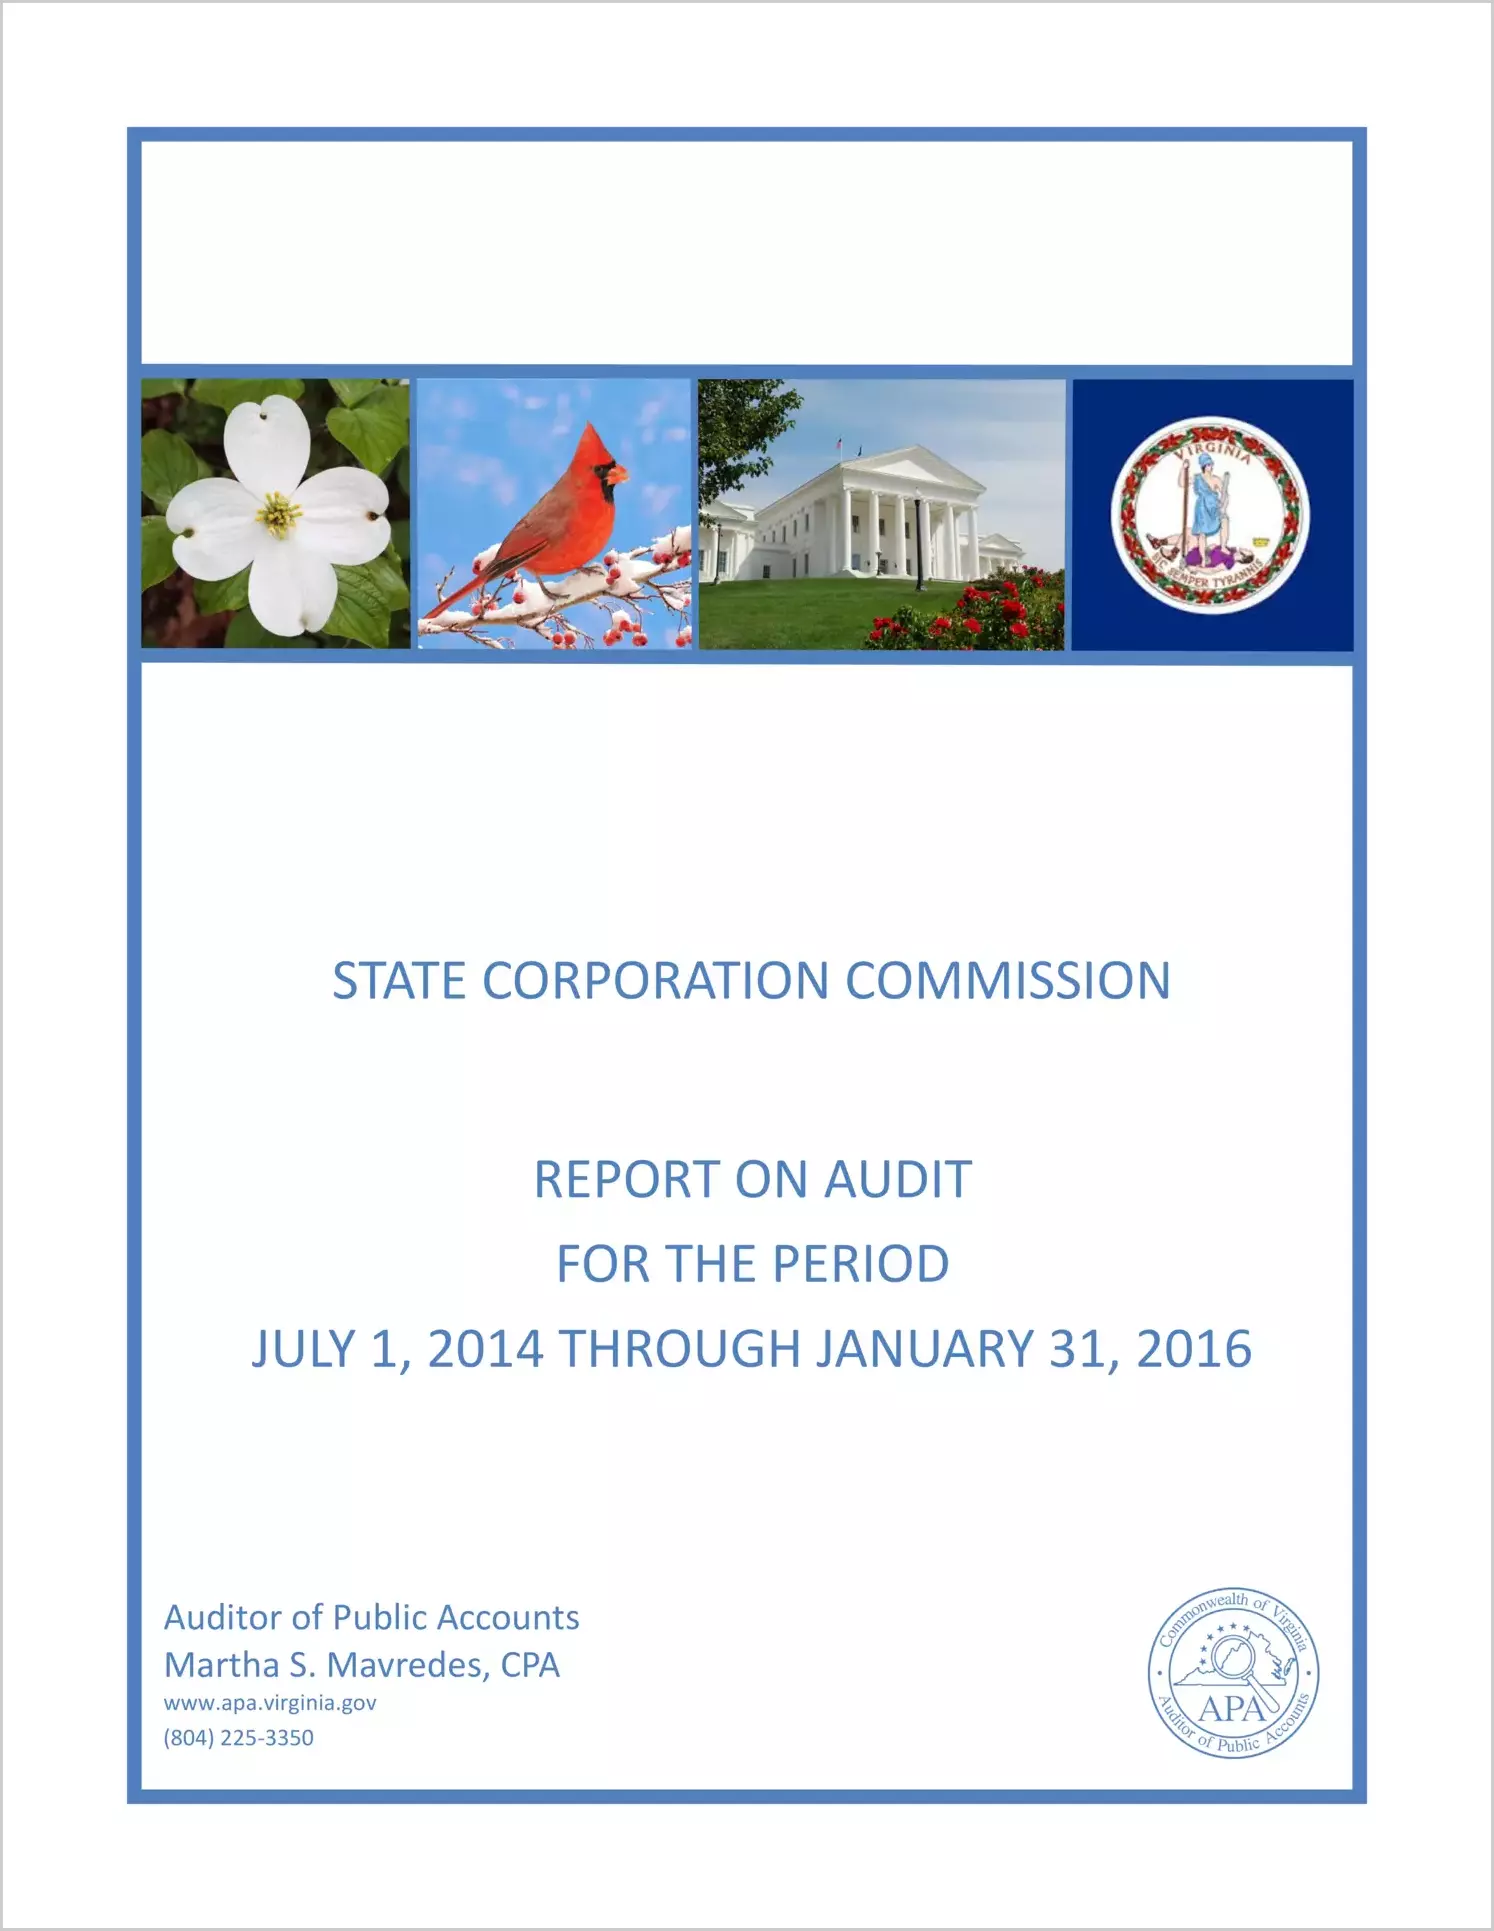 State Corporation Commission Report on Audit for the period July 1, 2014 through January 31, 2016